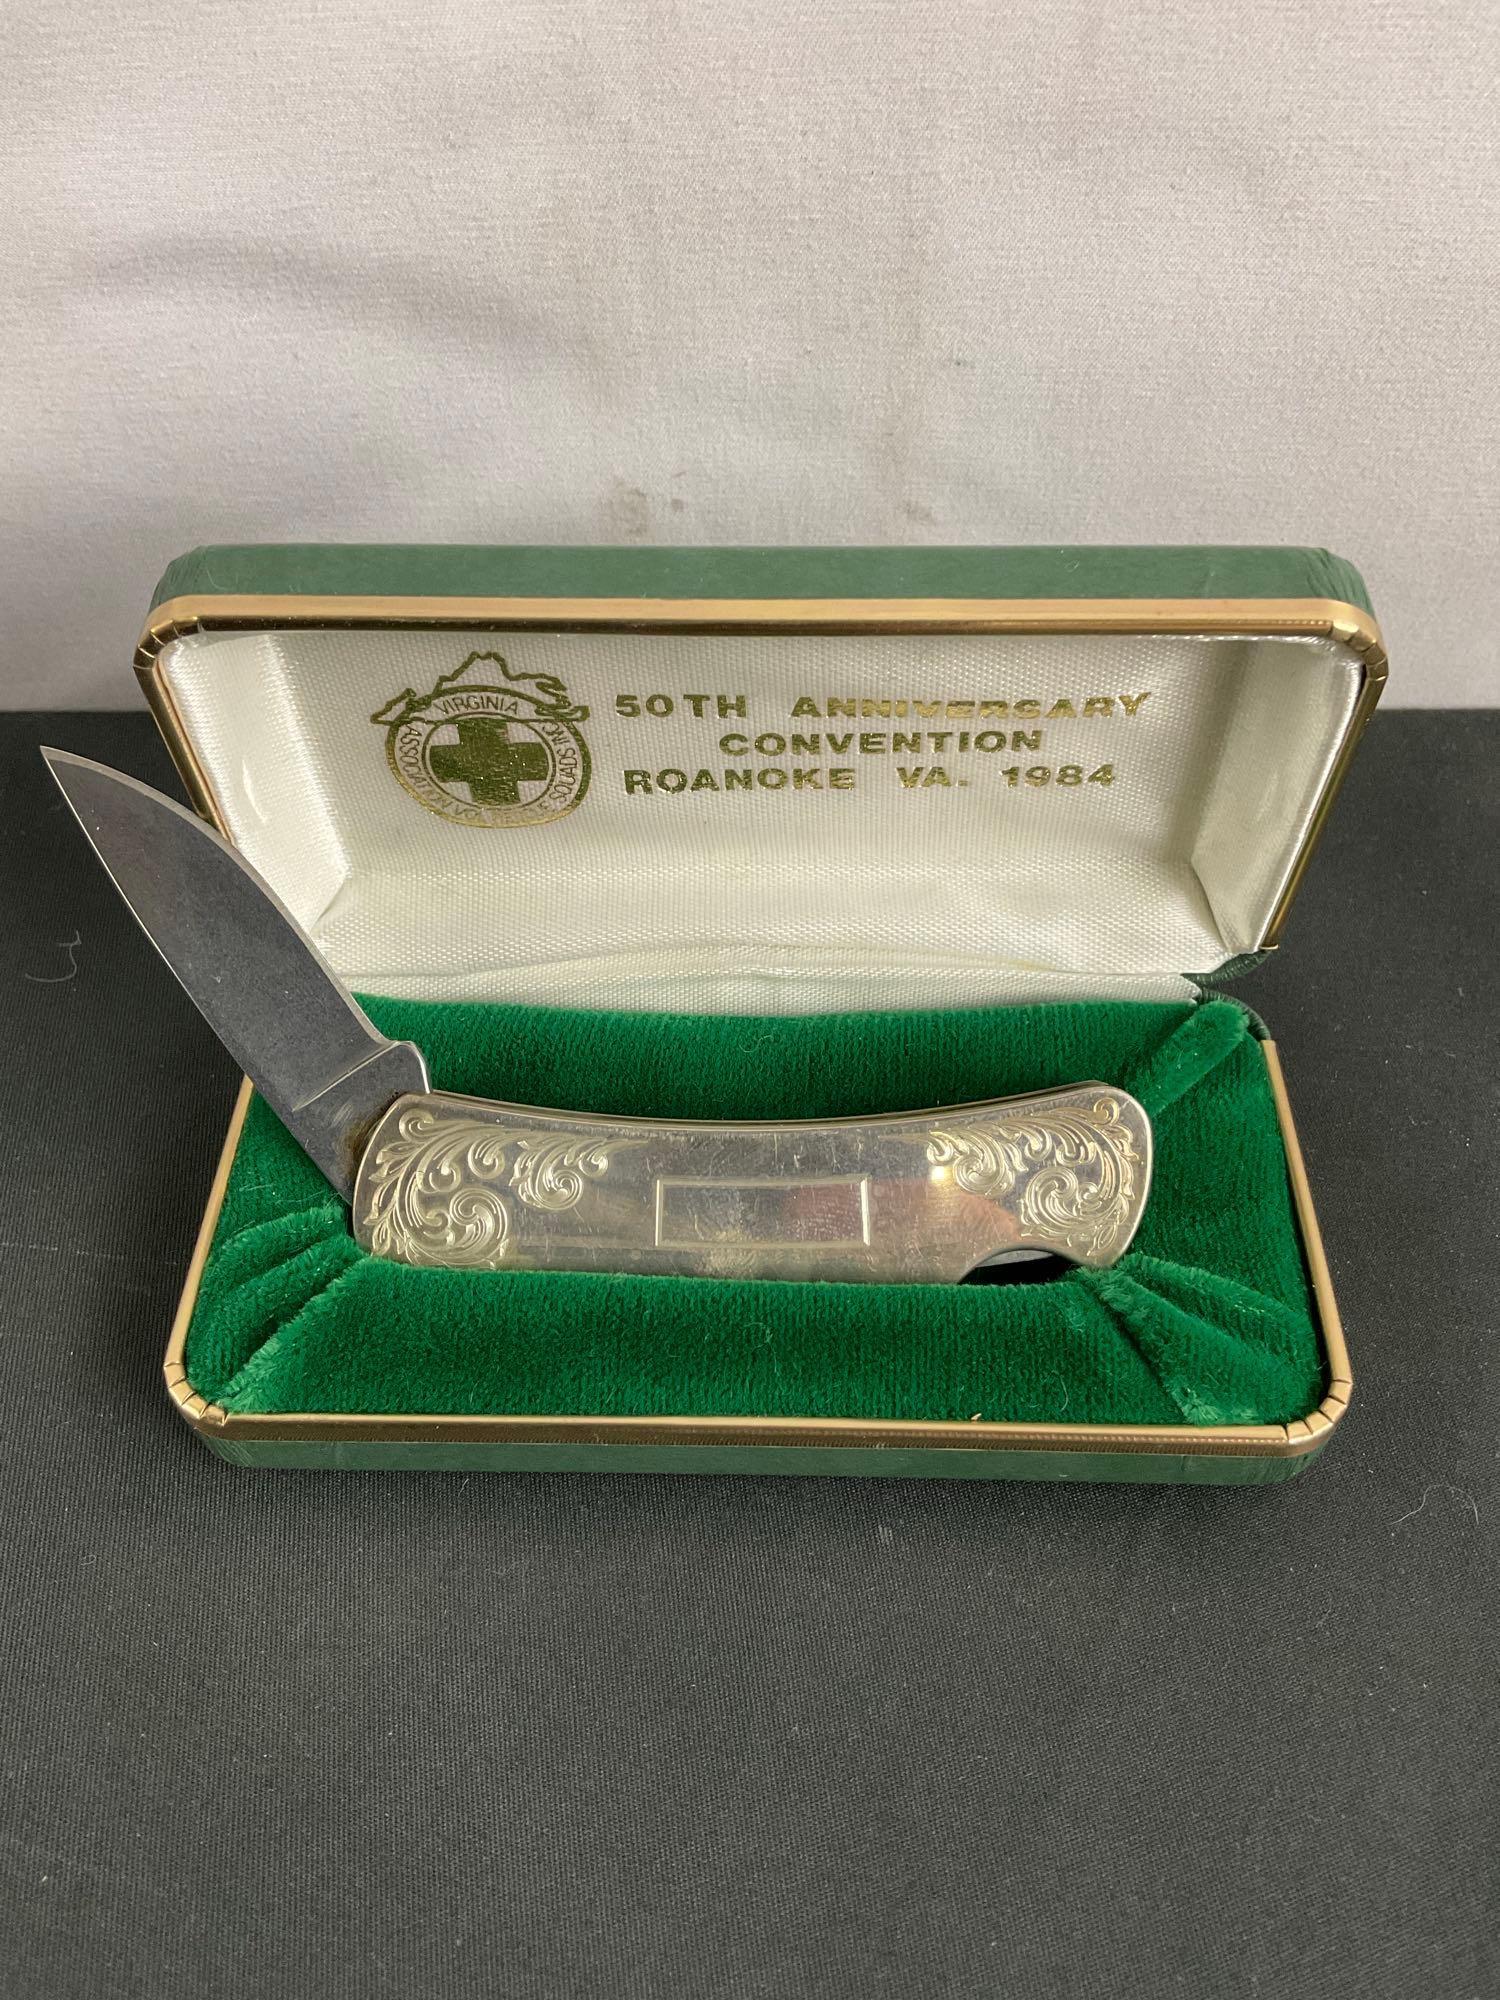 Buck Folding Pocket Knives - 50th Anniversary Convention Knives - Numbered 525 & 525T